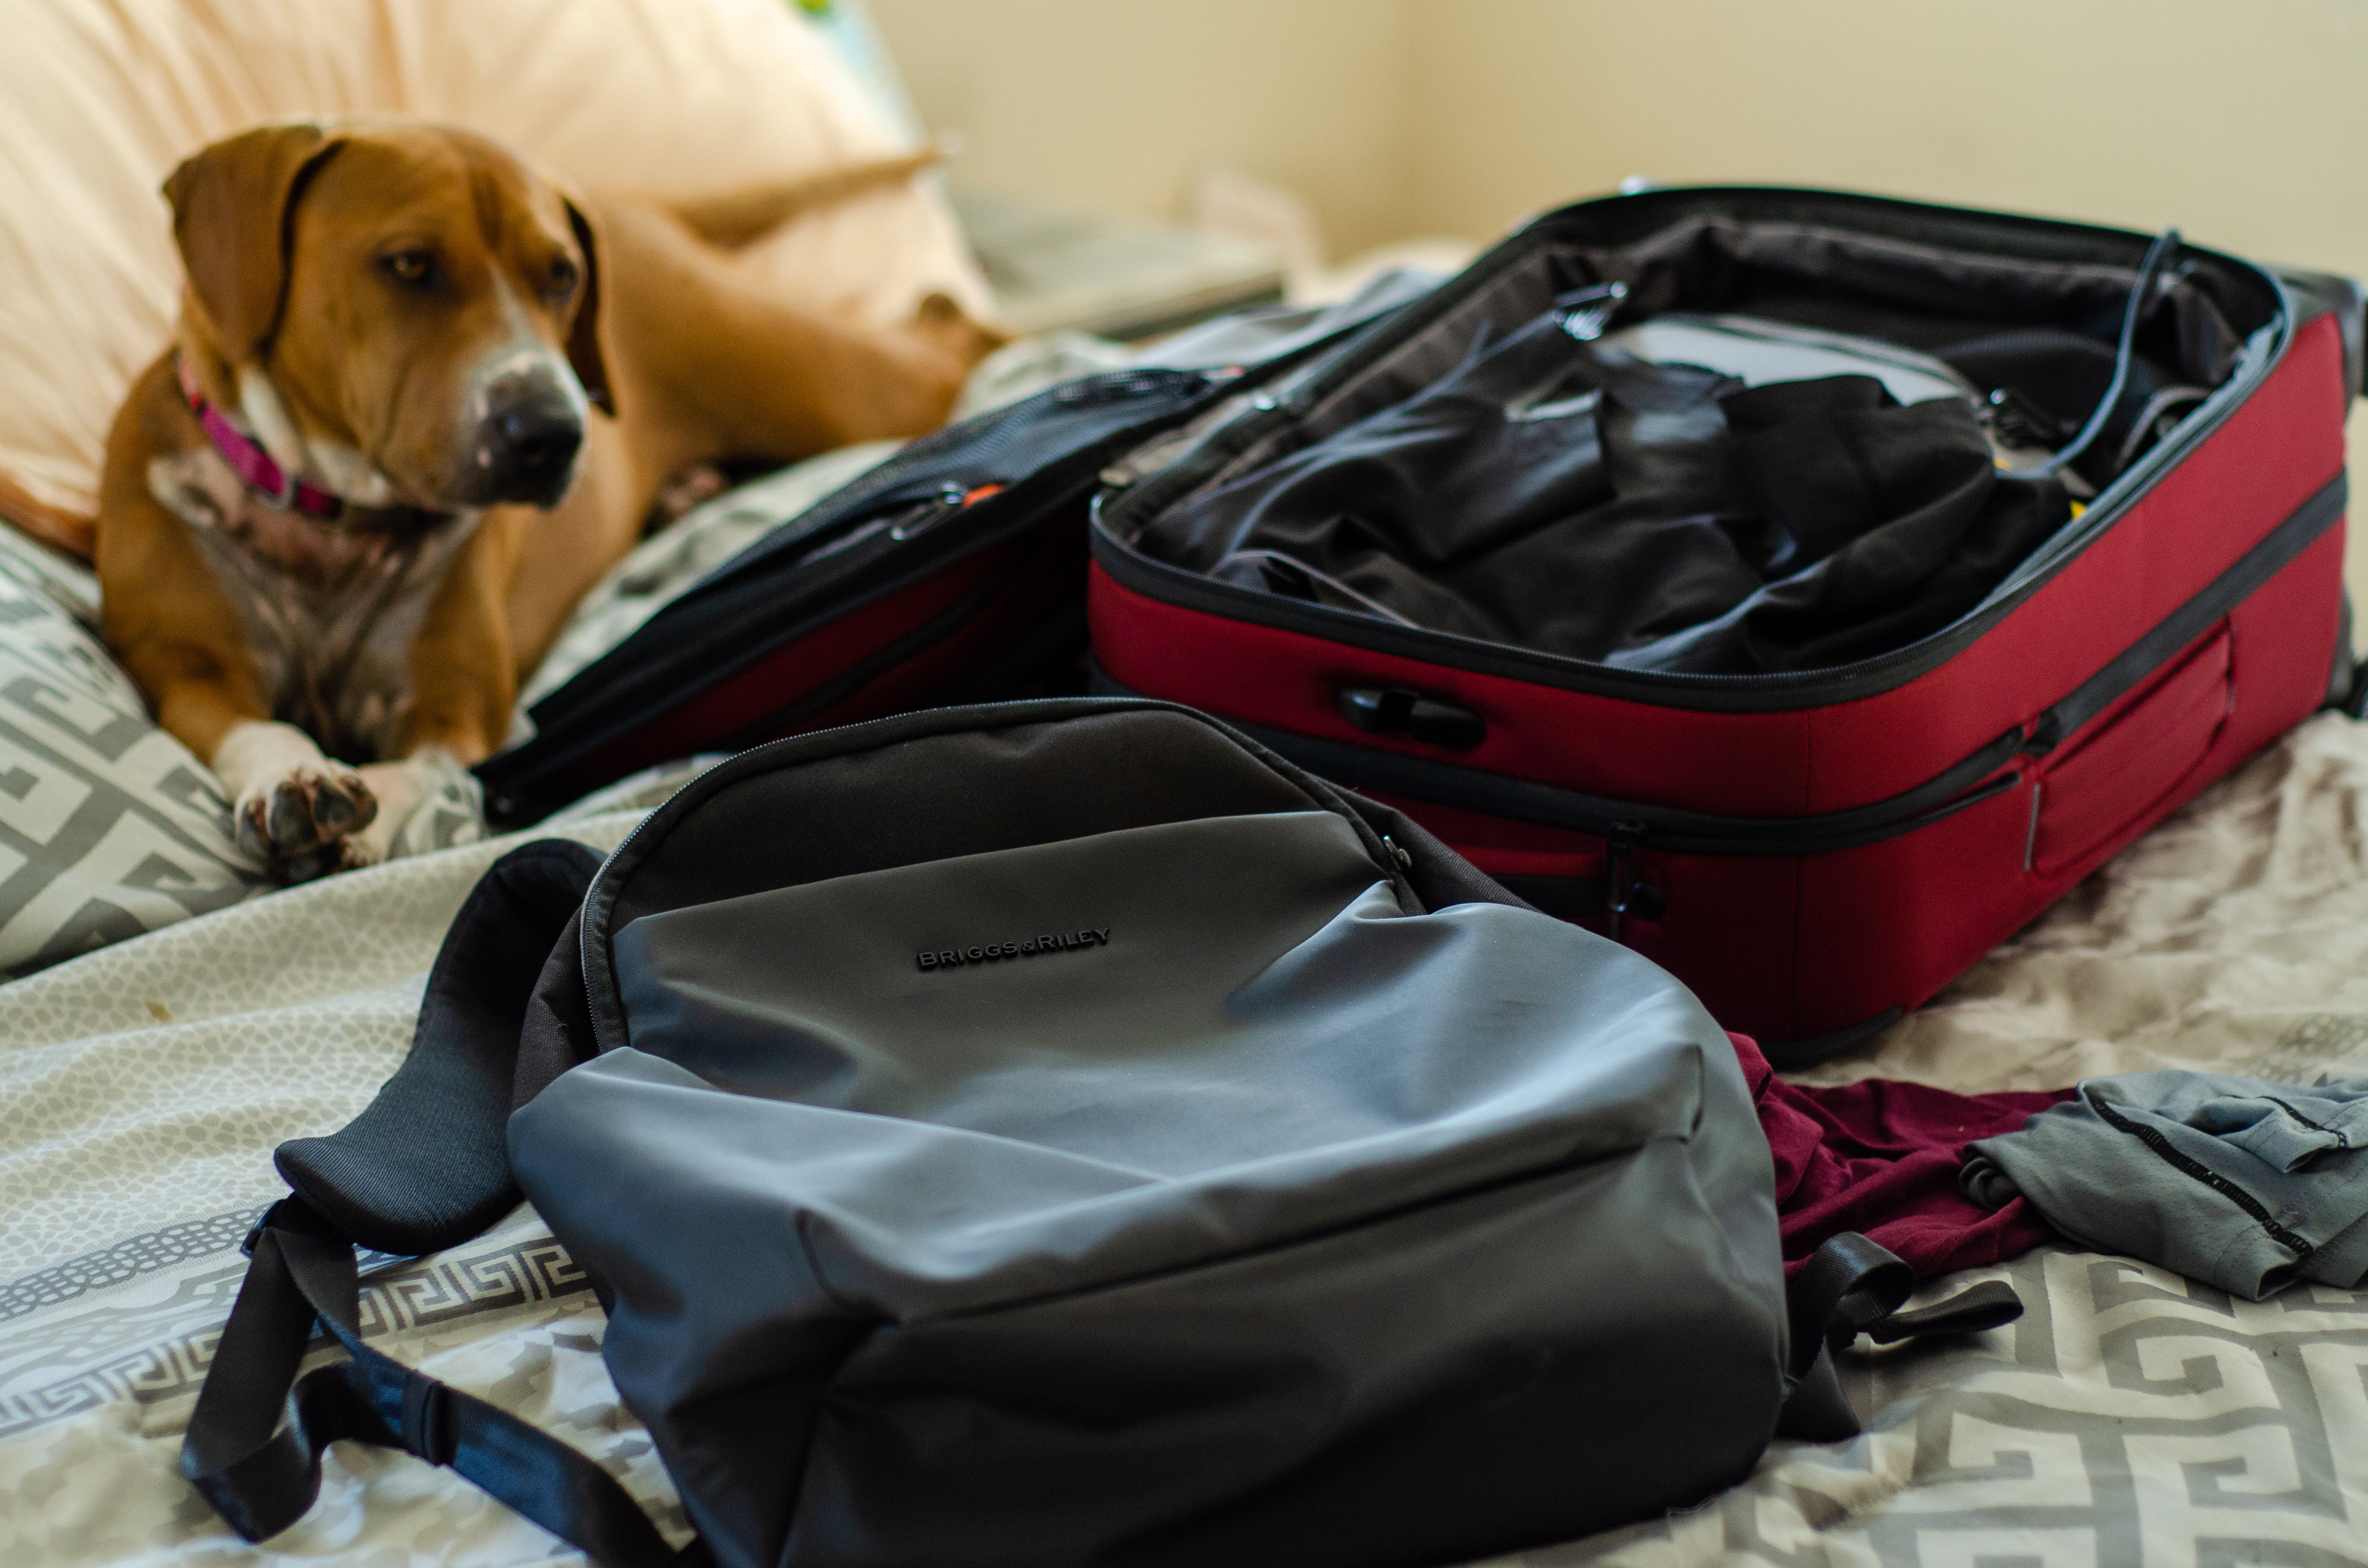 16 Tips for Traveling with Your Pet: Road Trip Edition